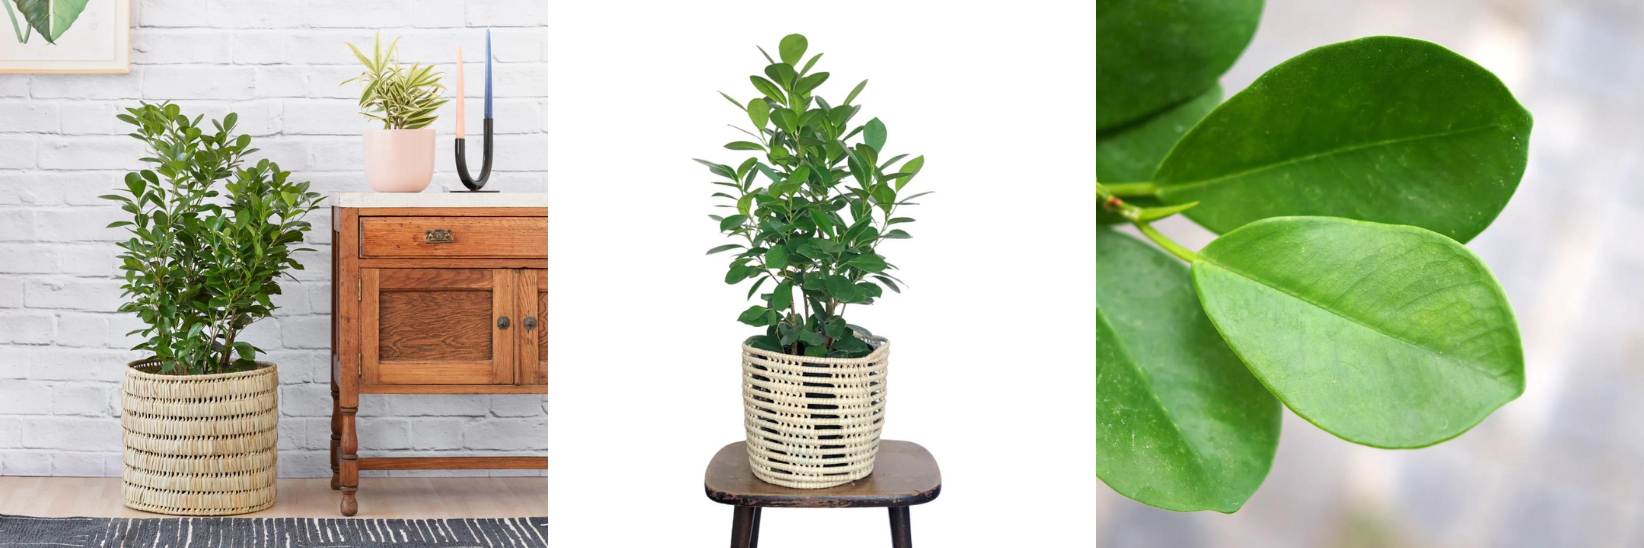 Ficus Moclame Care Instructions